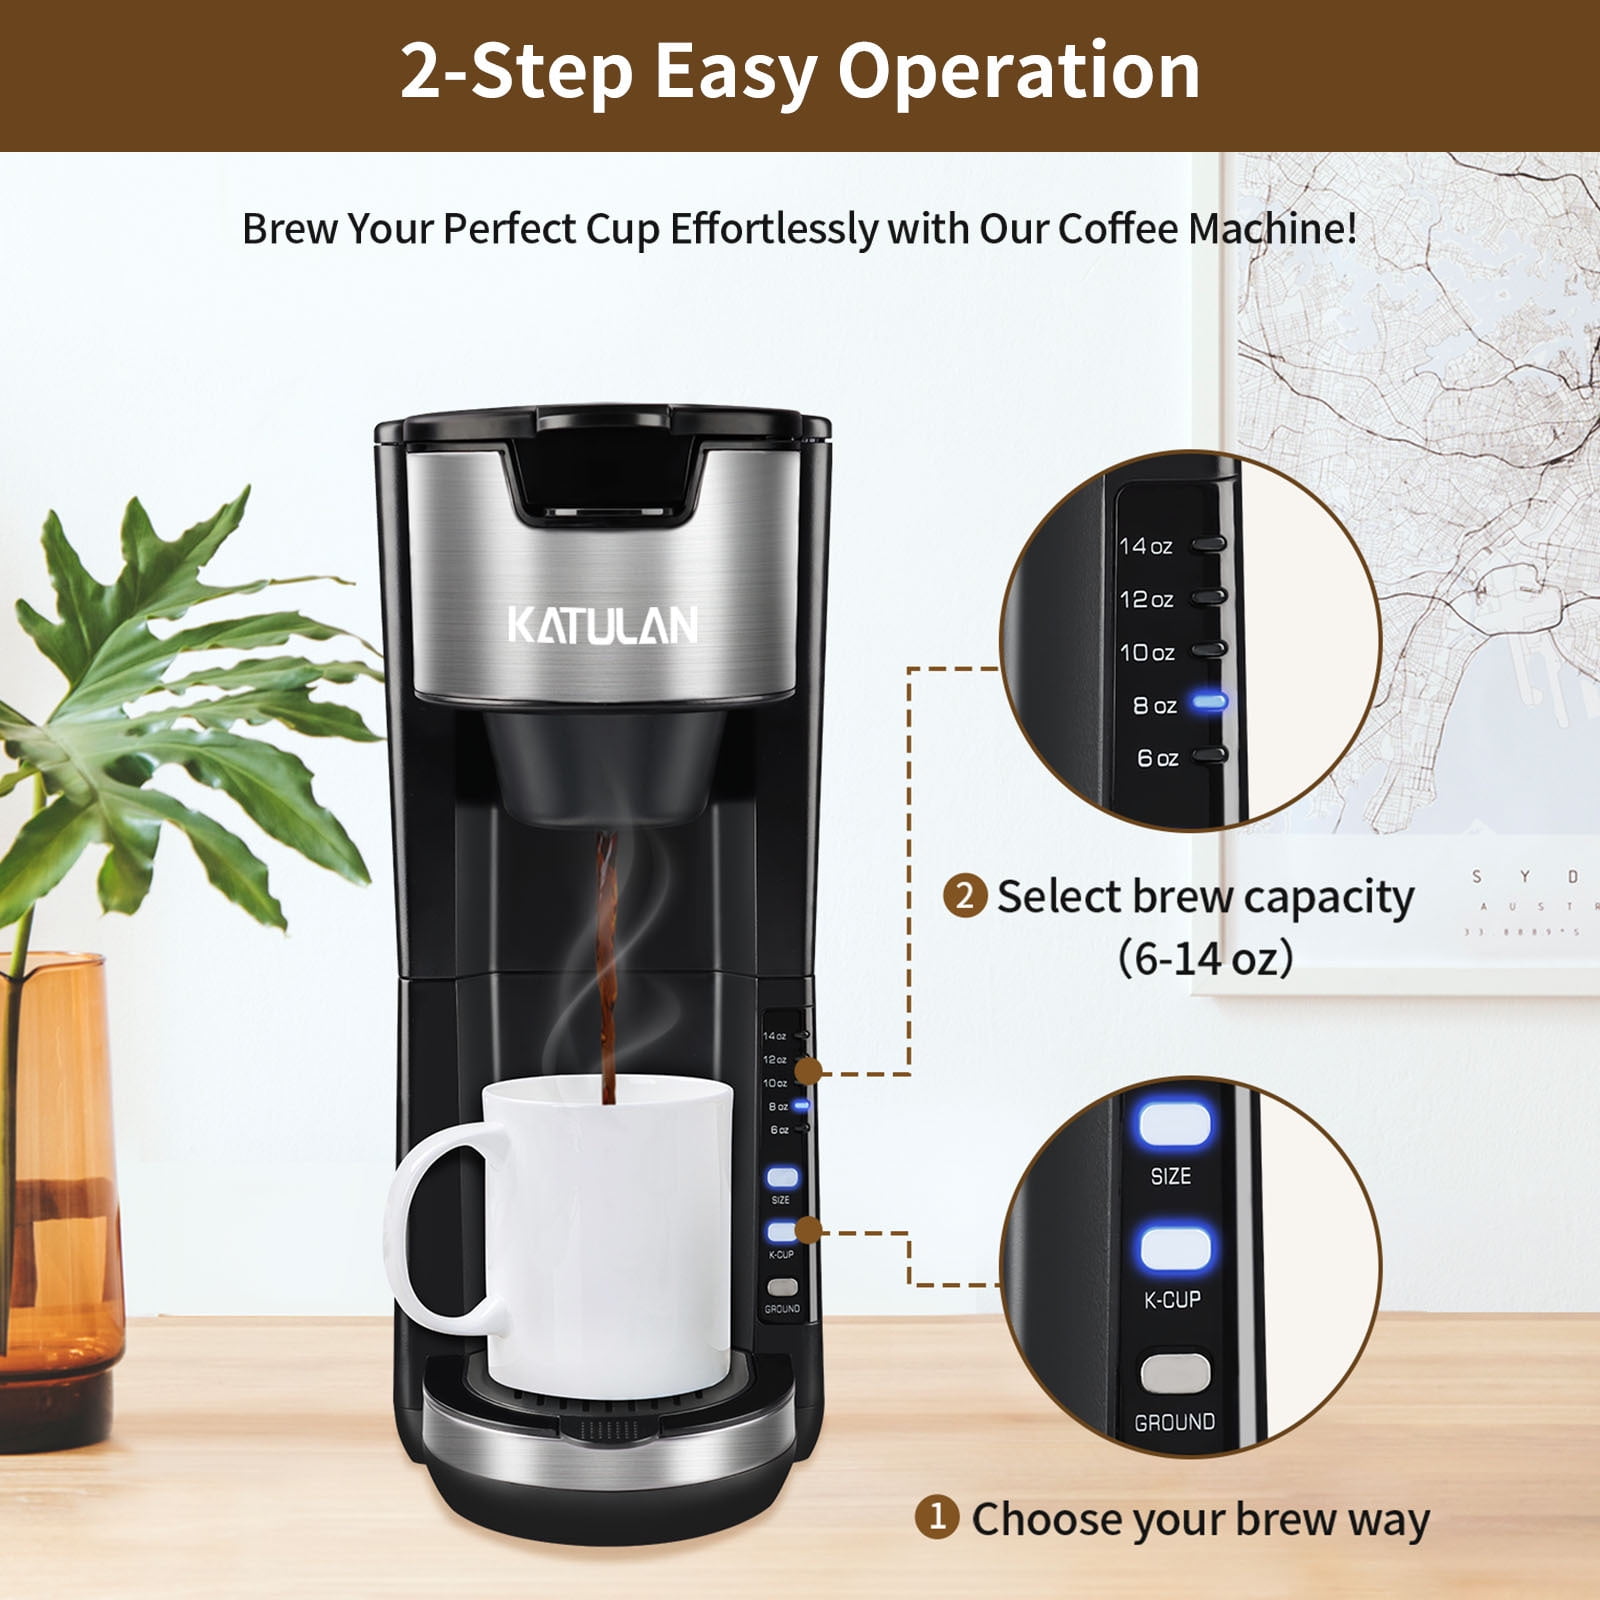 x Windaze Single Serve Coffee Maker for K Cup & Ground Coffee, Mini One Cup Coffee Brewer with Filter 6-14oz Reservoir Strength Control,Small Coffee